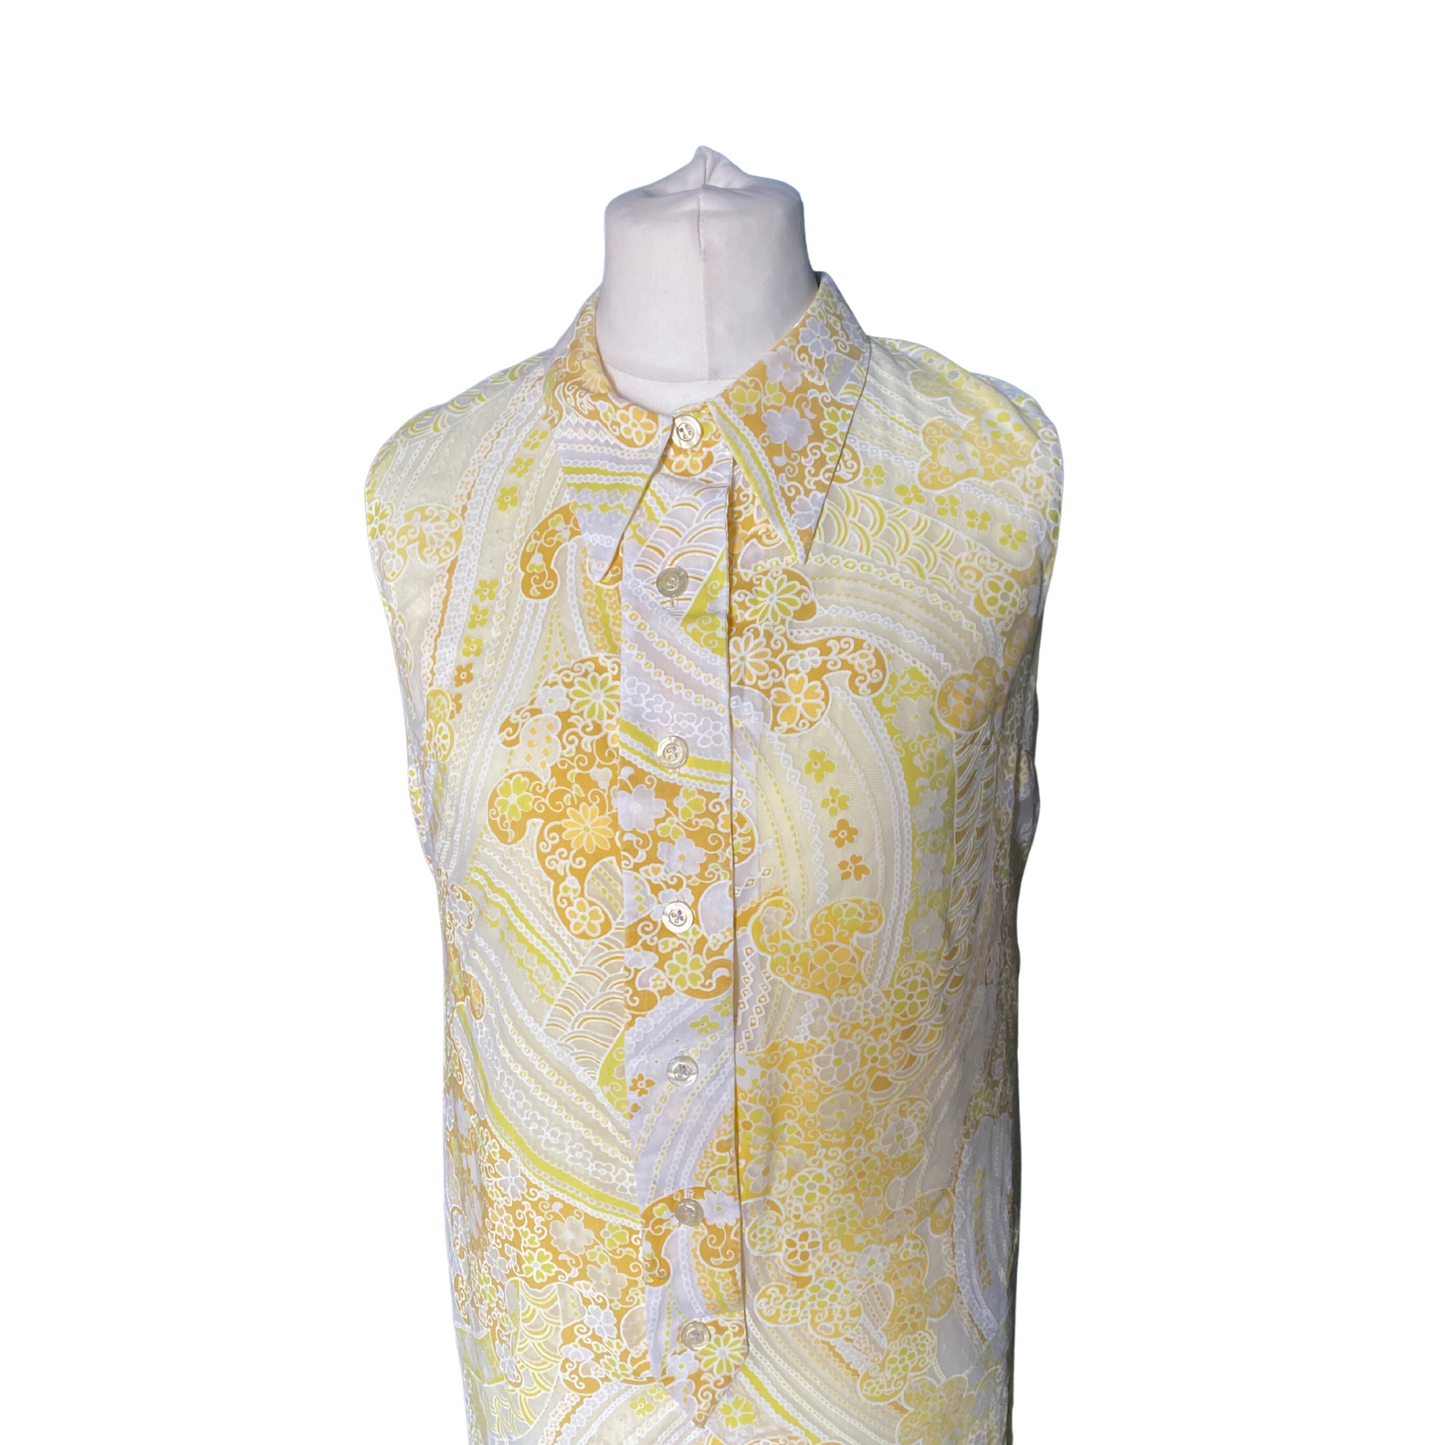 60s Mod Style Yellow Psychedelic Floral Shift Dress. Approx  UK size 14-16